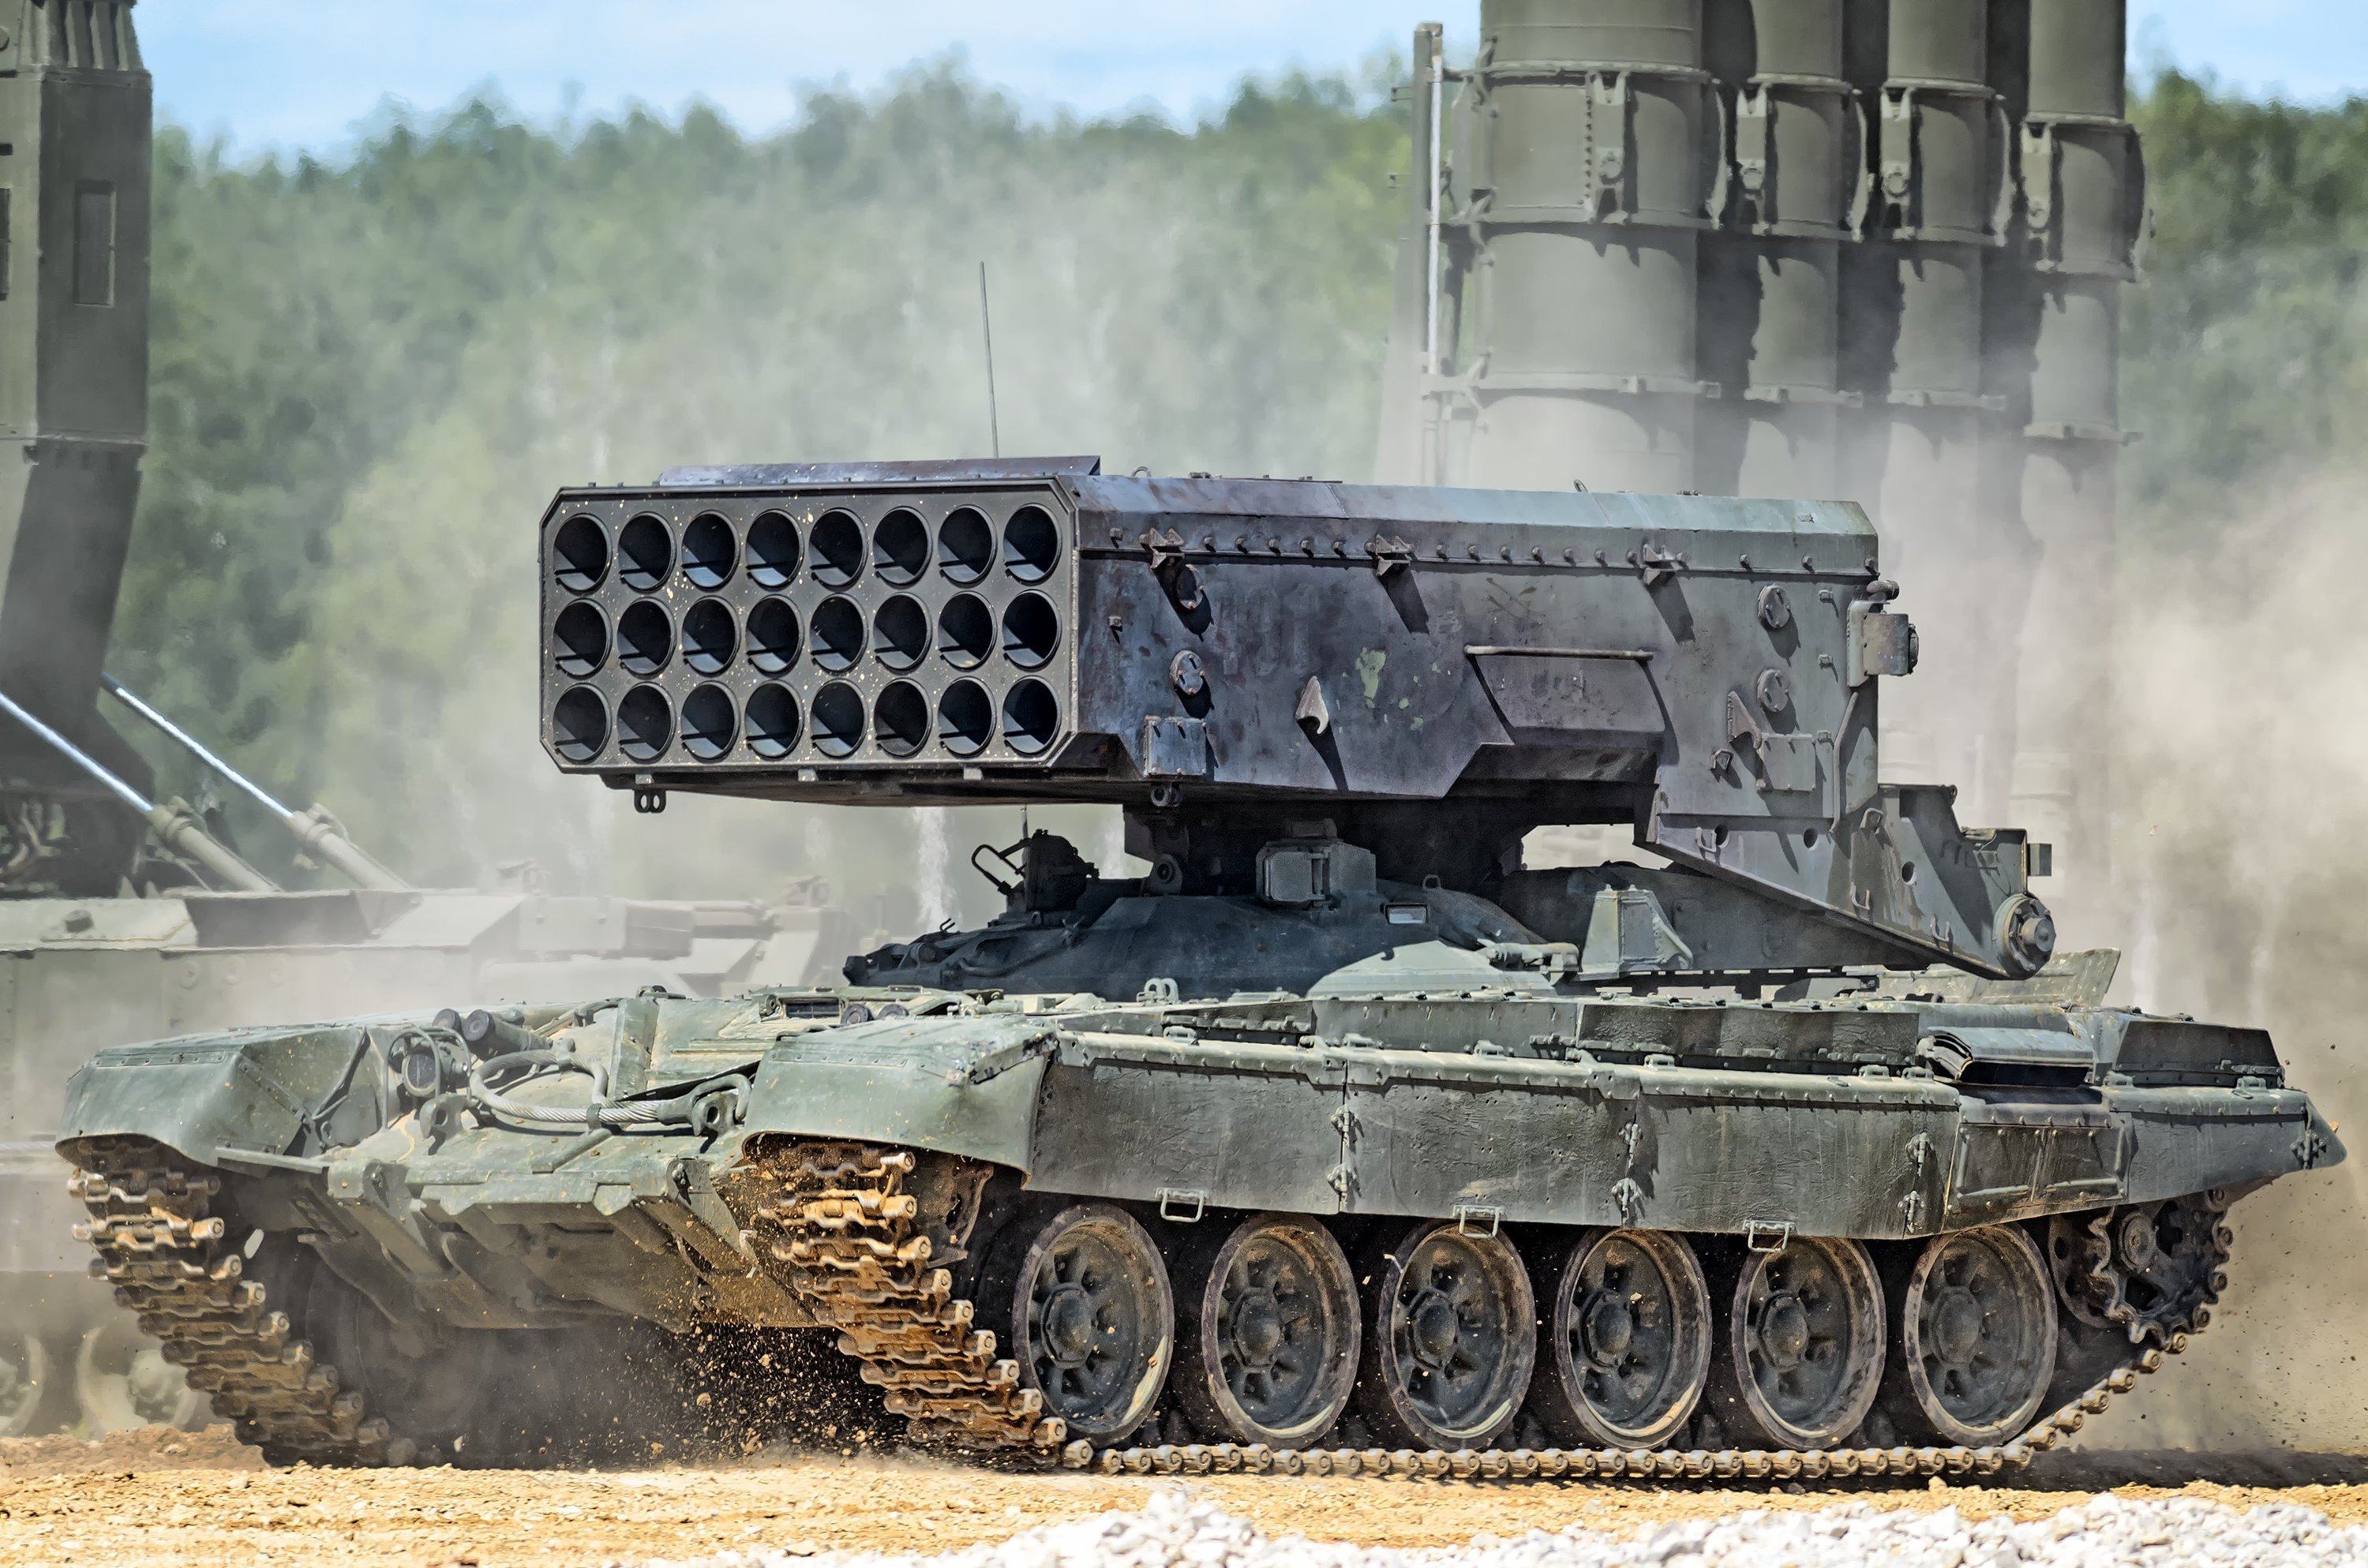 The Russian army’s TOS heavy flamethrower system can be armed with thermobaric rockets. Photo: Shutterstock